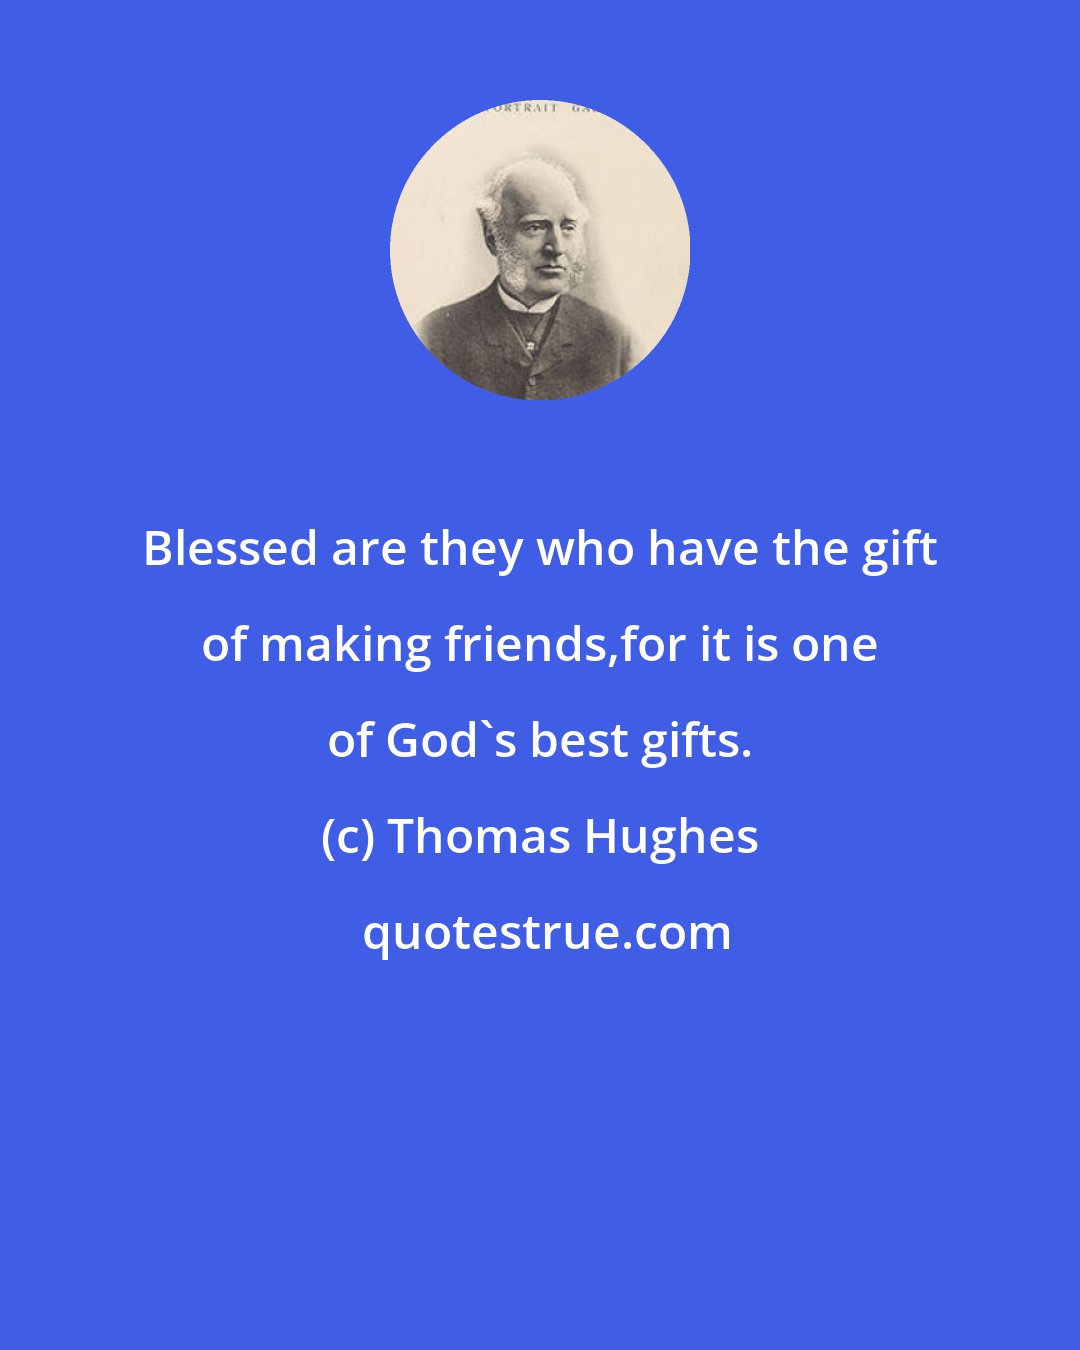 Thomas Hughes: Blessed are they who have the gift of making friends,for it is one of God's best gifts.